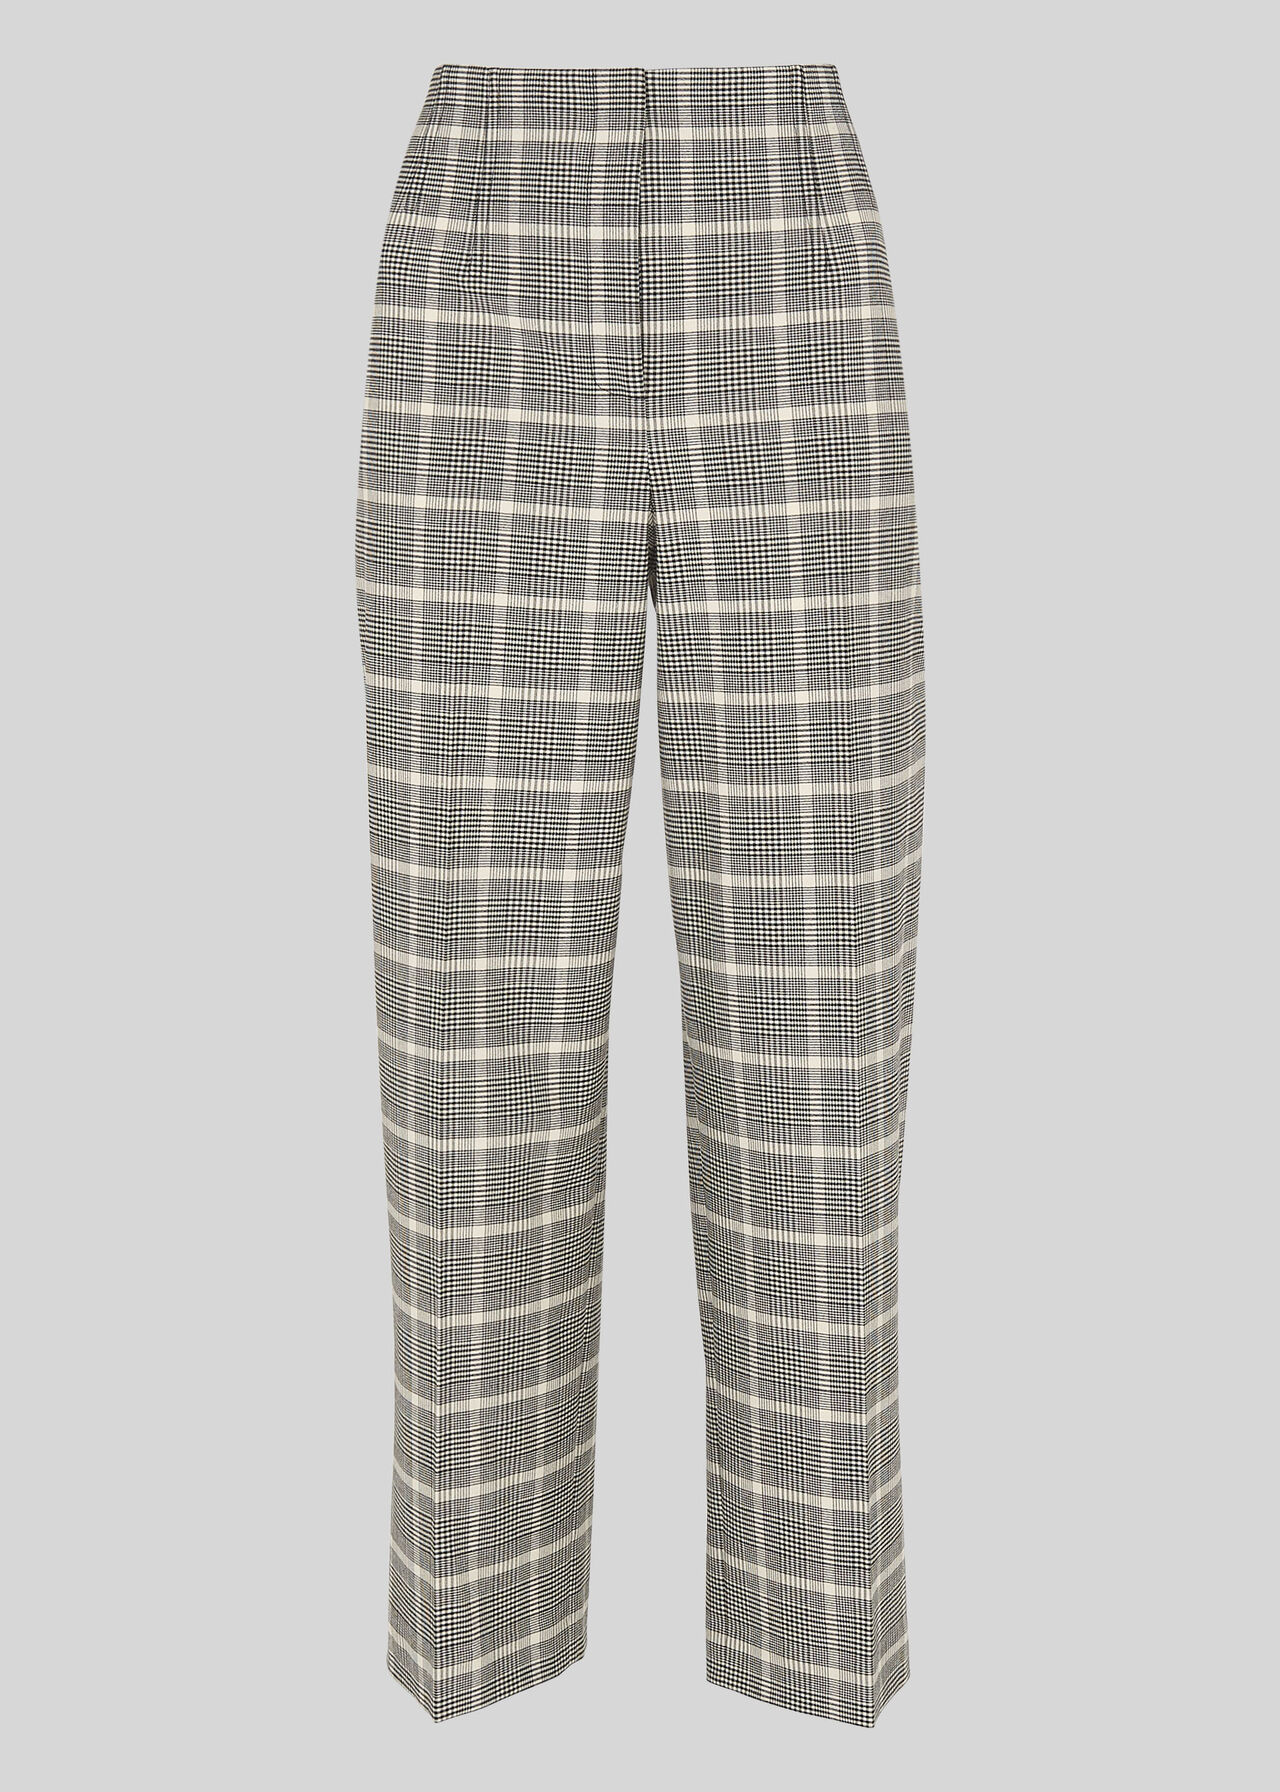 Courtney Check Trouser Black and White